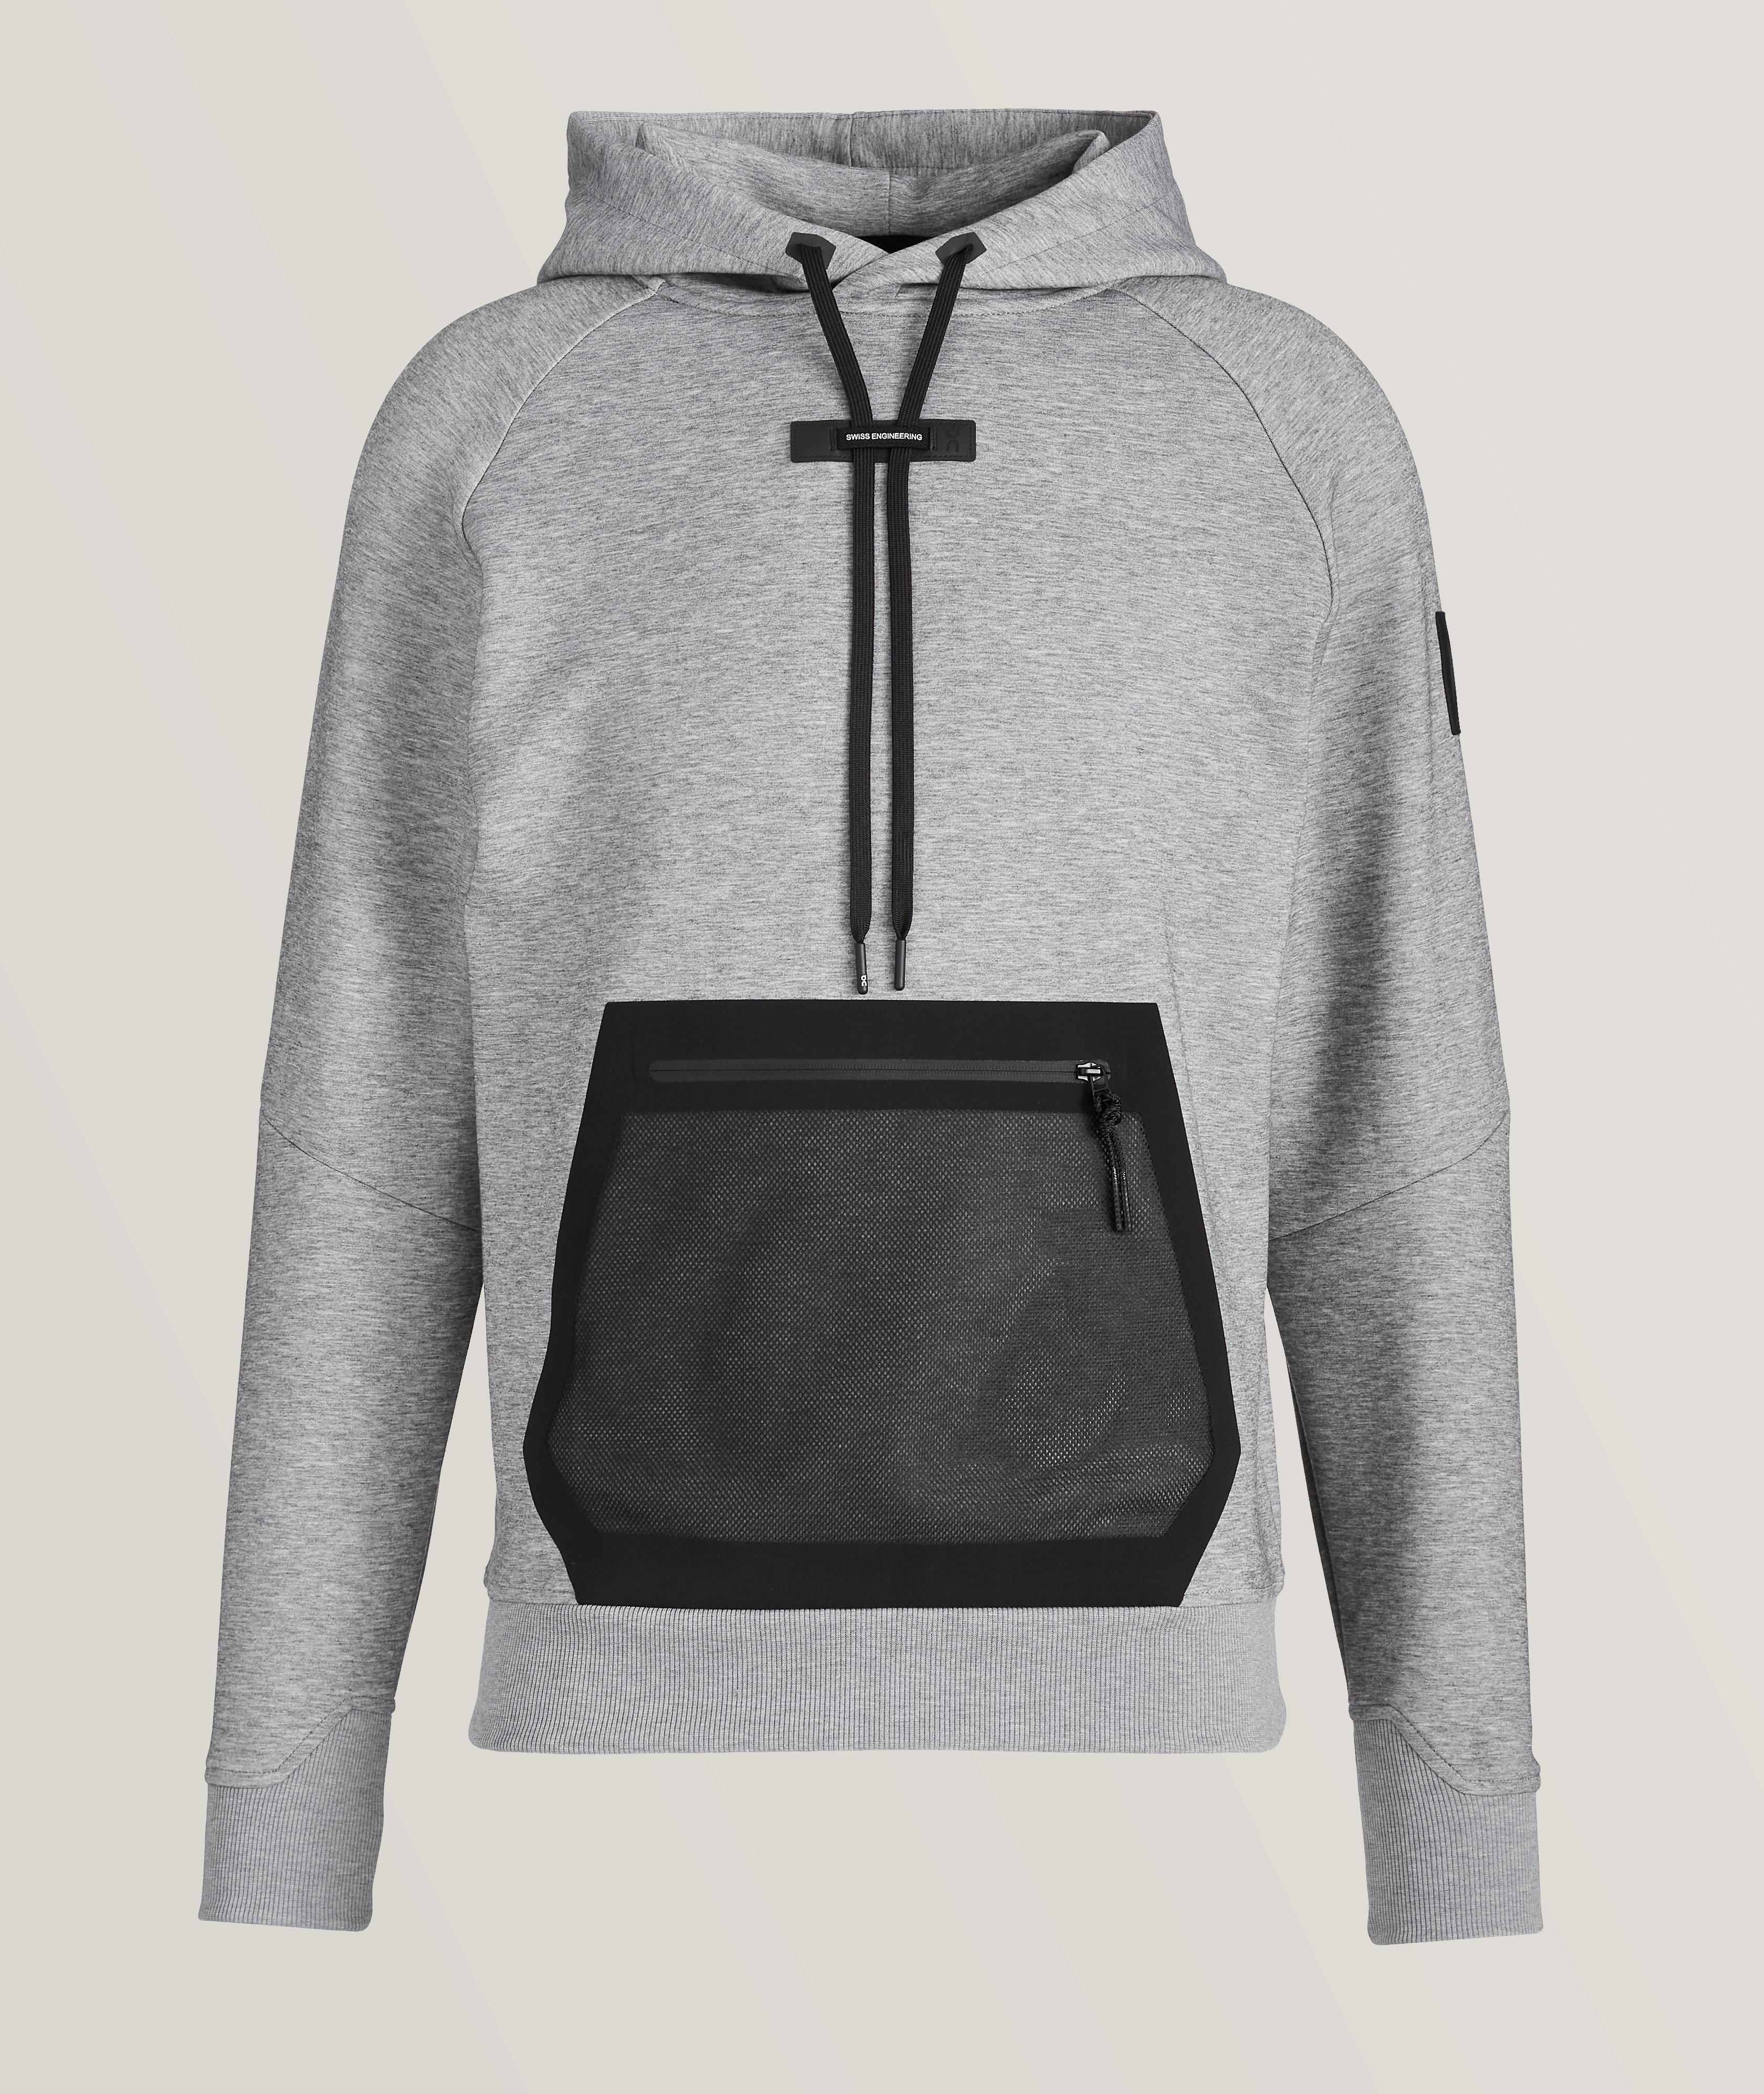 High Performance Technical Hooded Sweater image 0